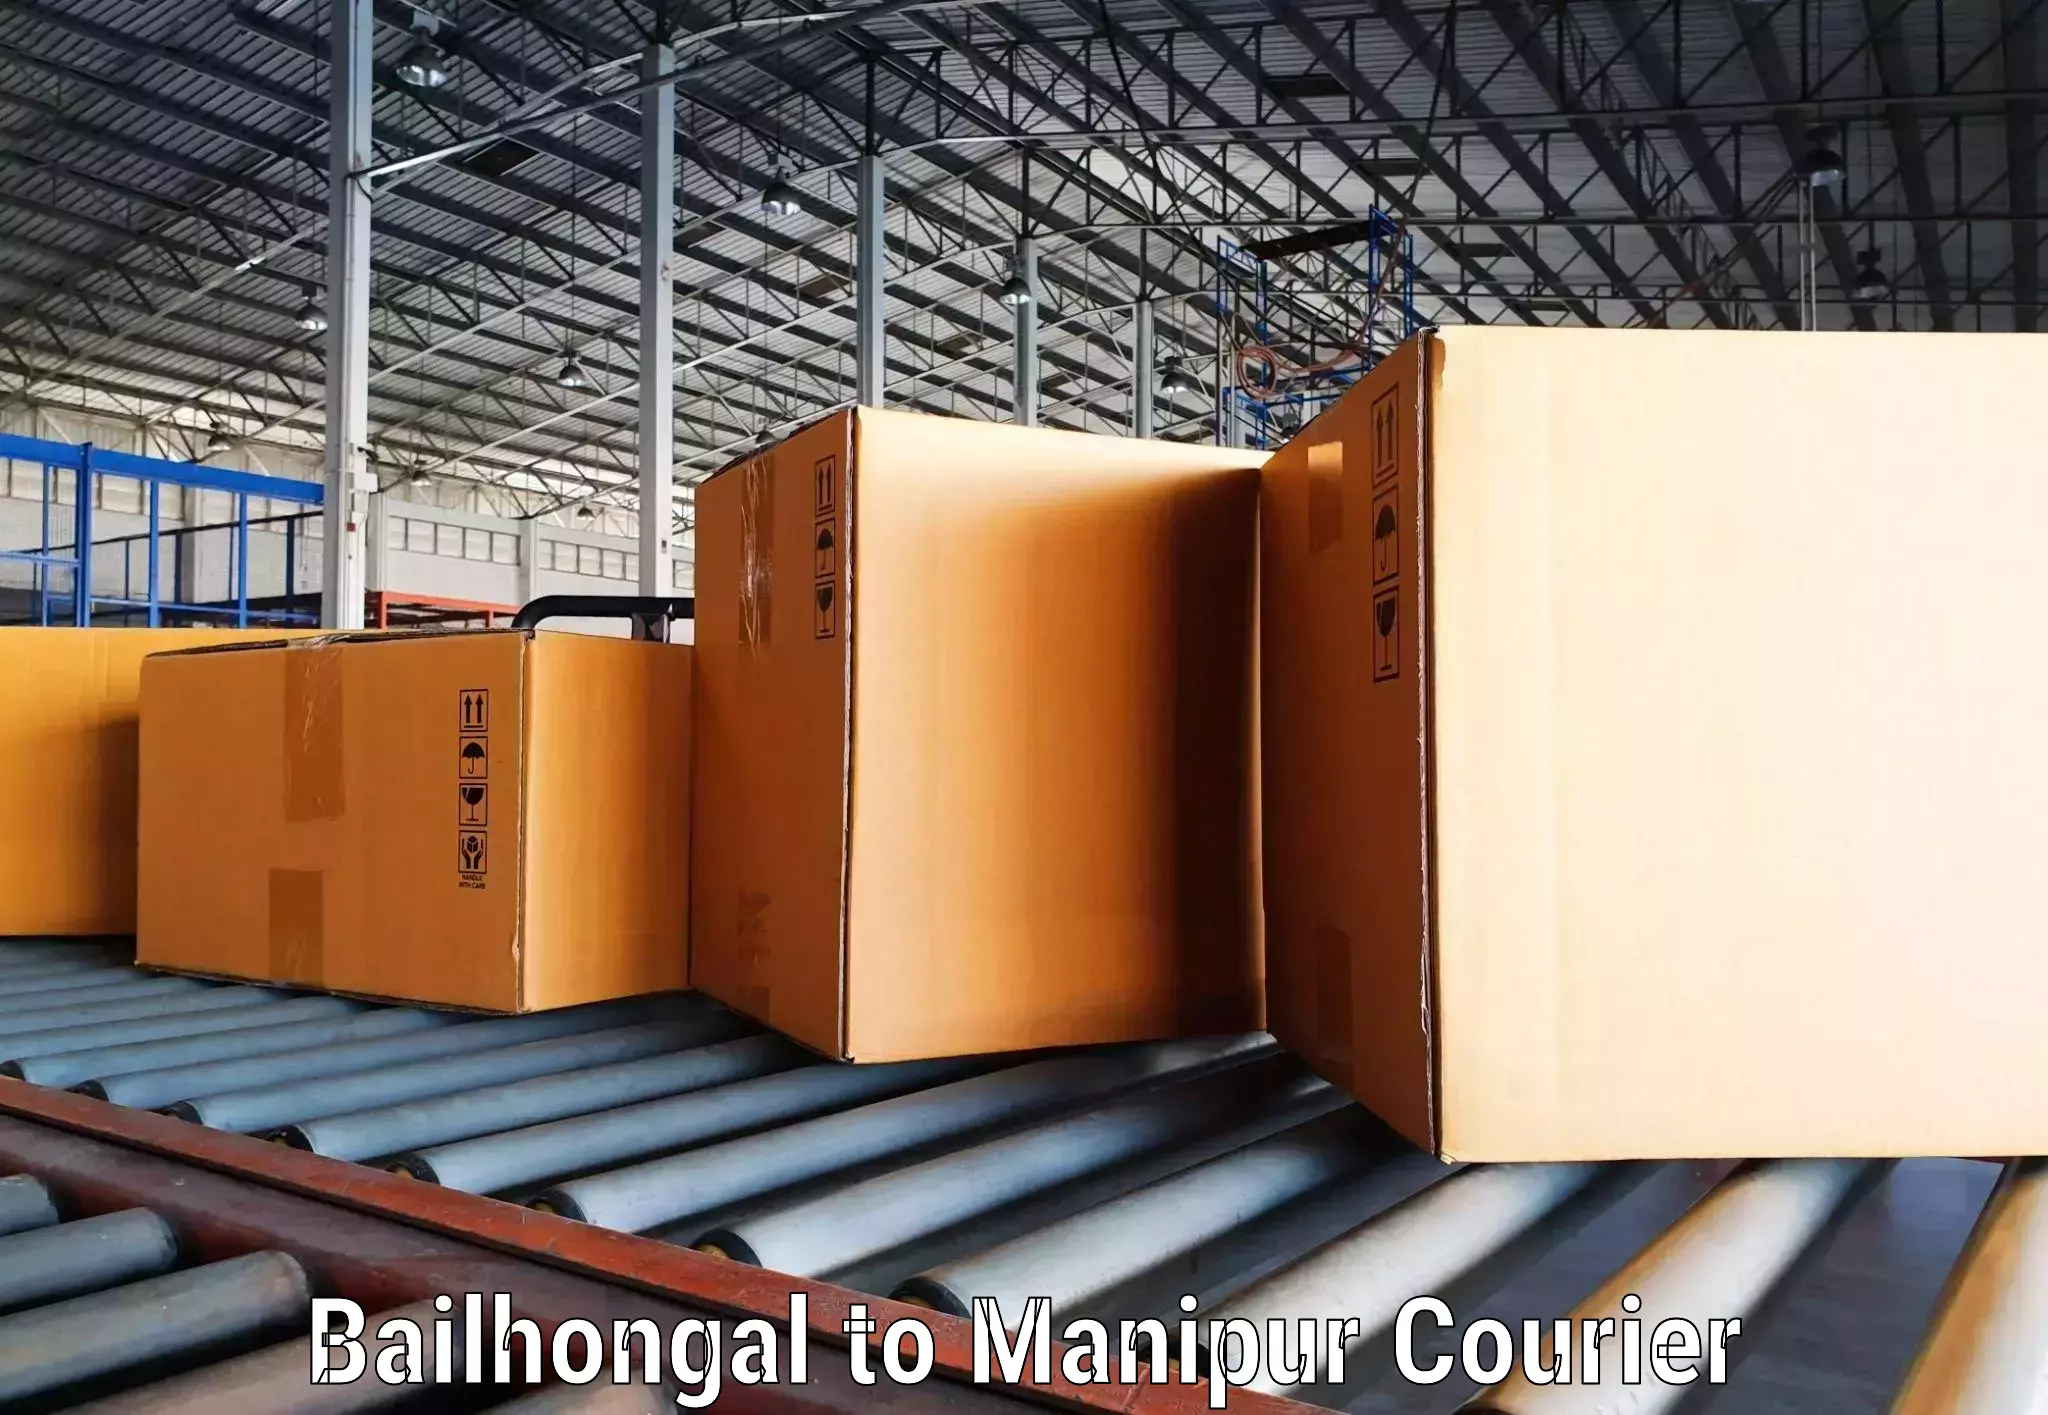 High-capacity parcel service Bailhongal to Manipur